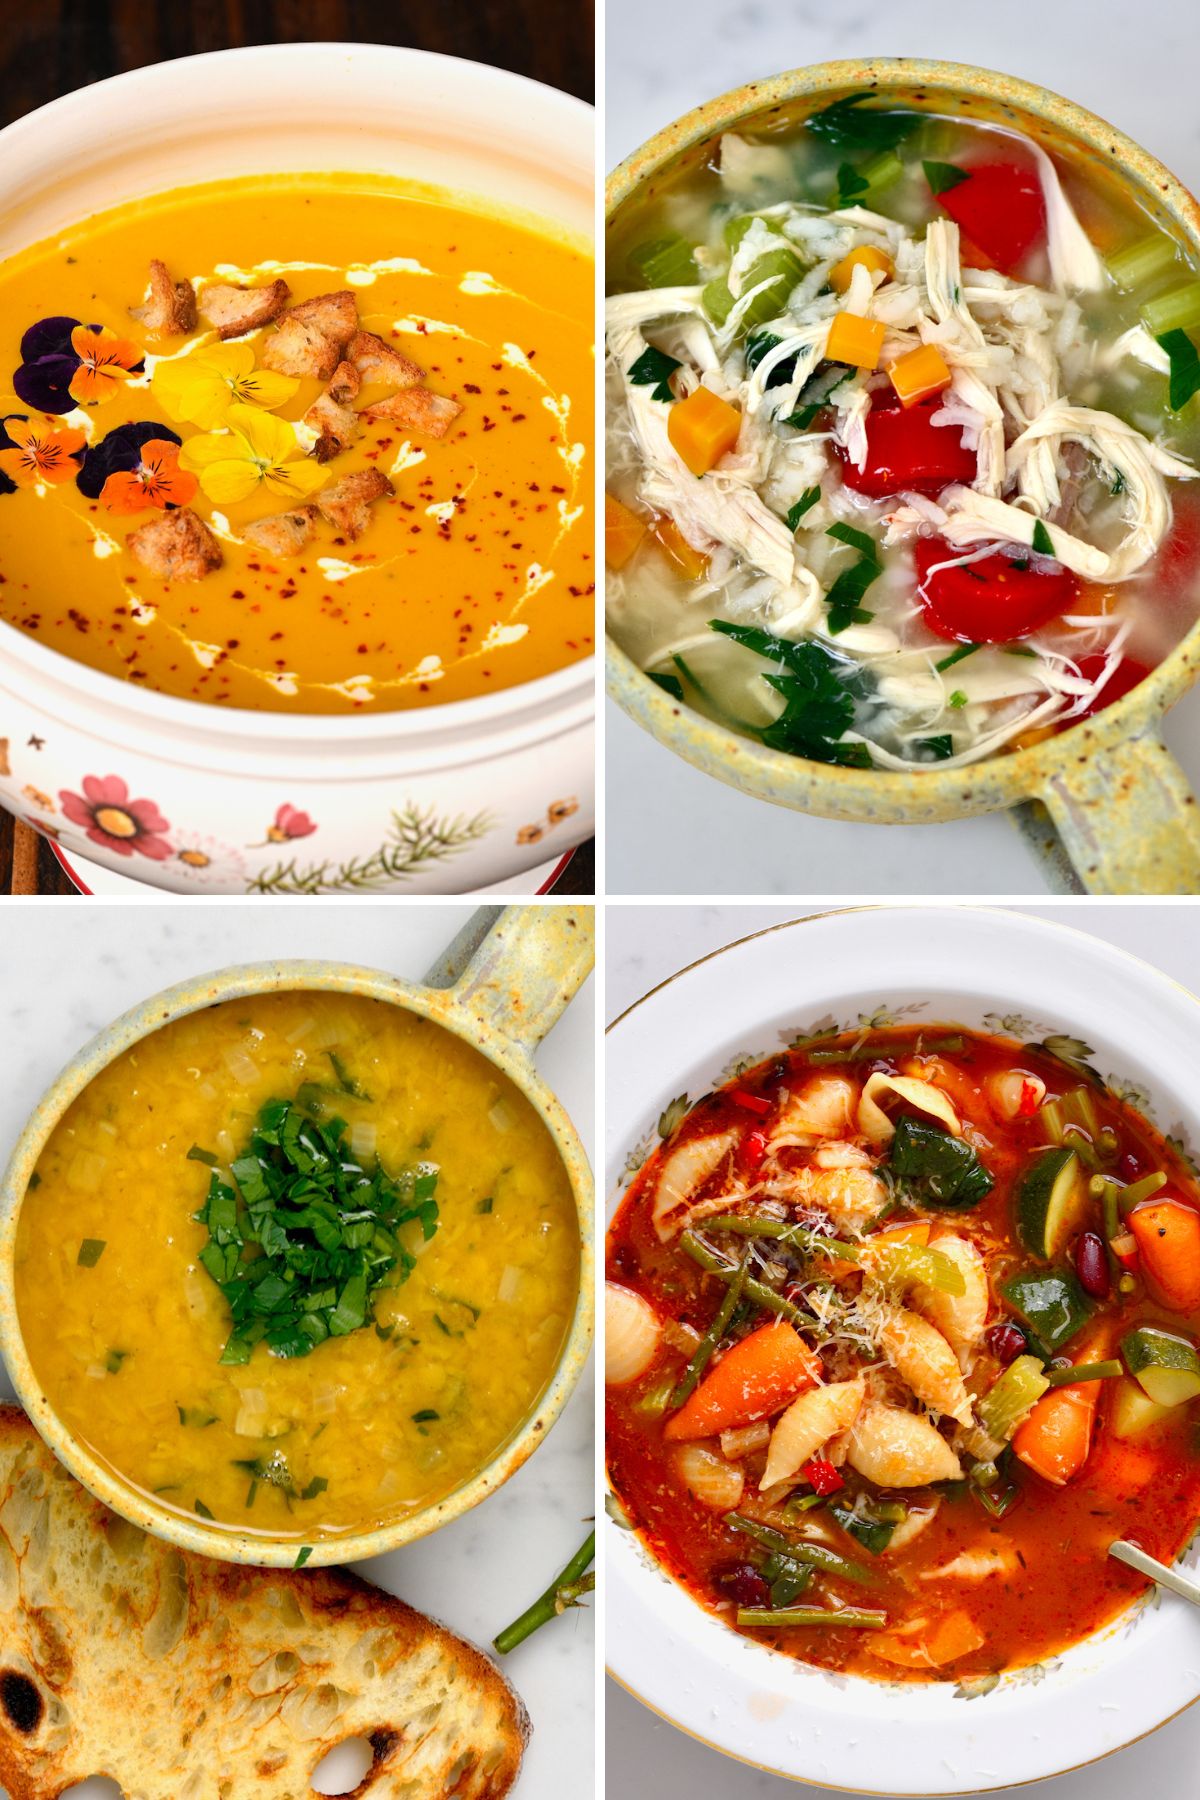 Quick Soups, Stews, and Curries as hot lunch ideas